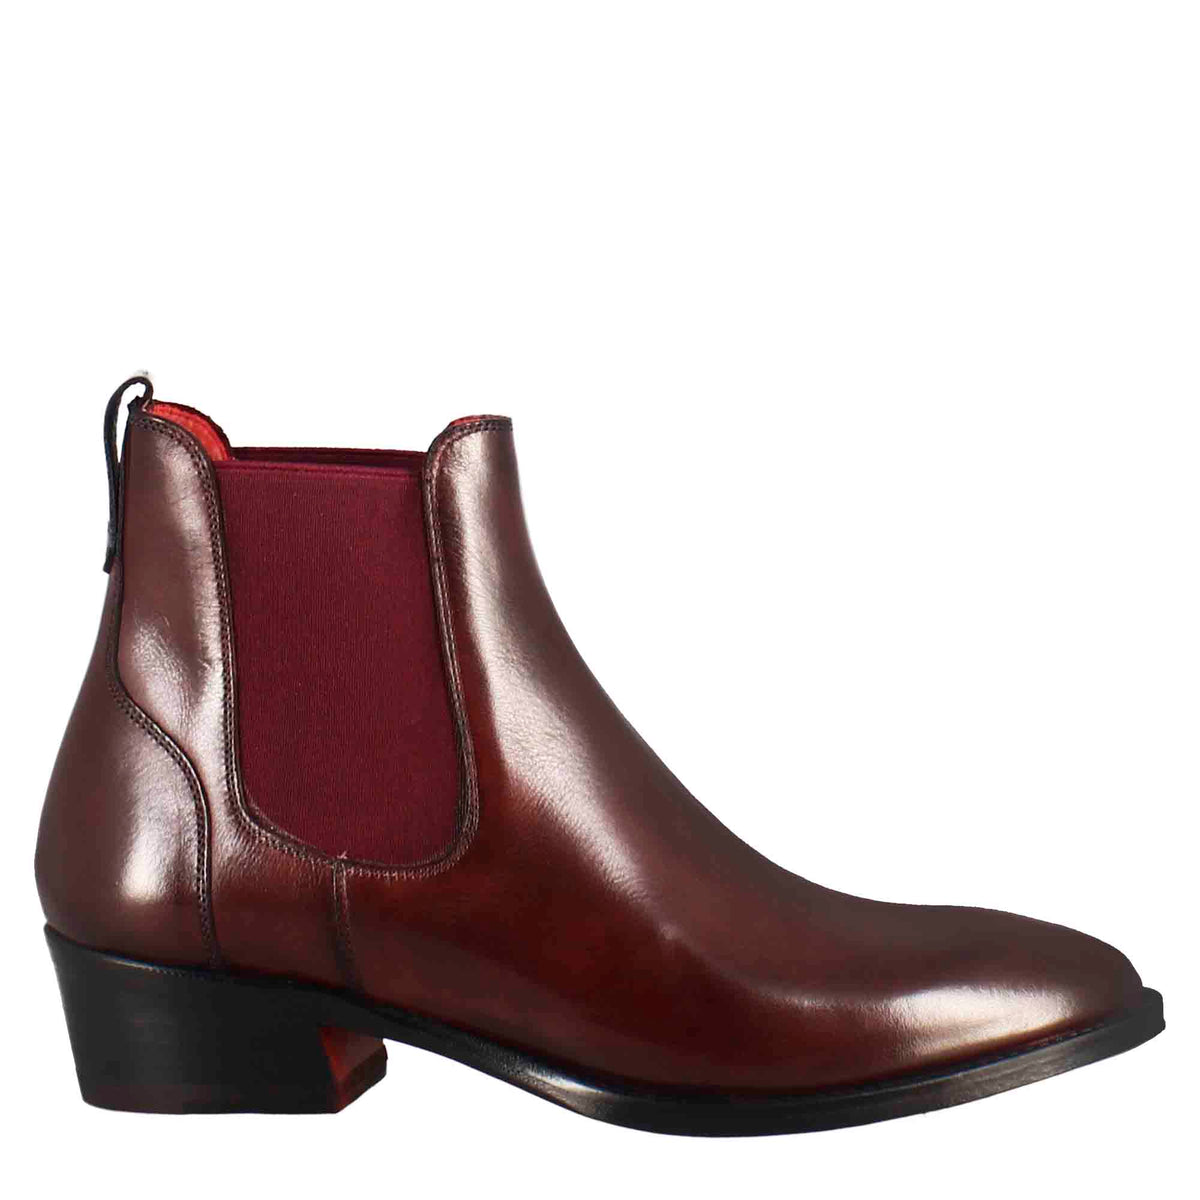 Women's smooth chelsea boot with medium heel in burgundy-coloured leather